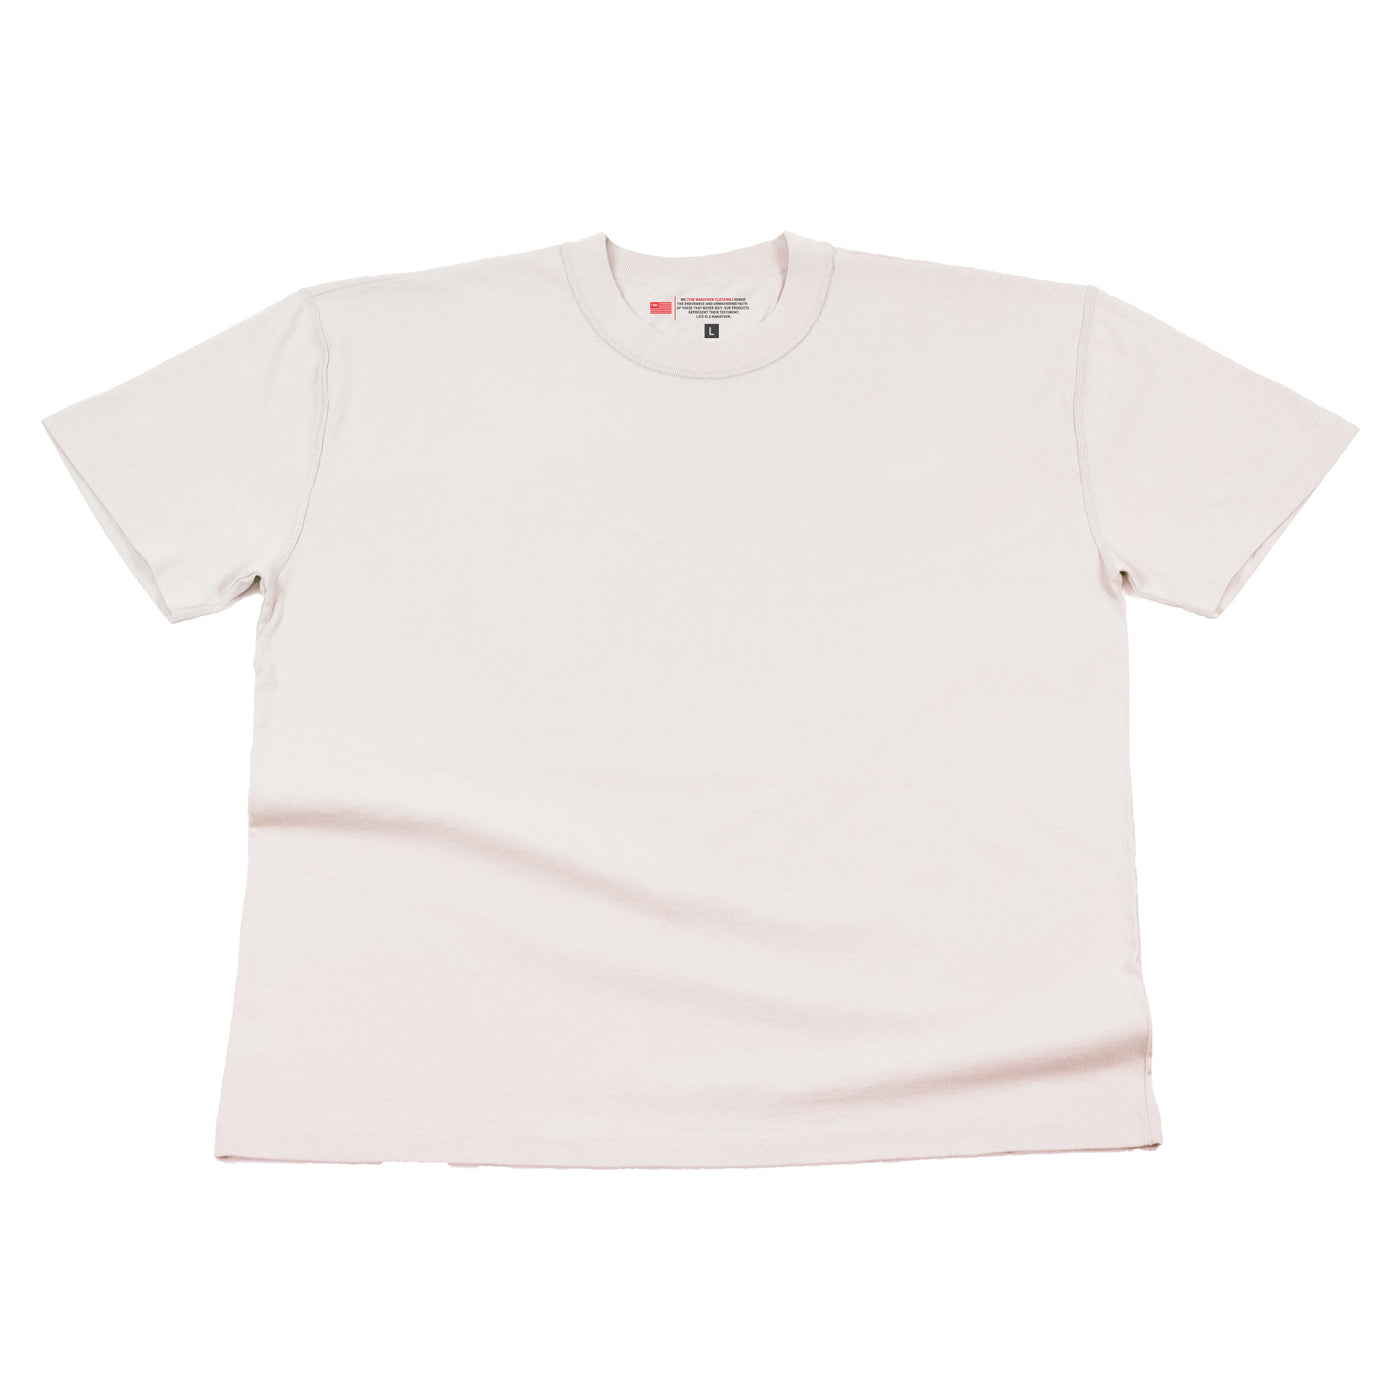 Limited Edition (Ultra) T-Shirt - Cream - Front